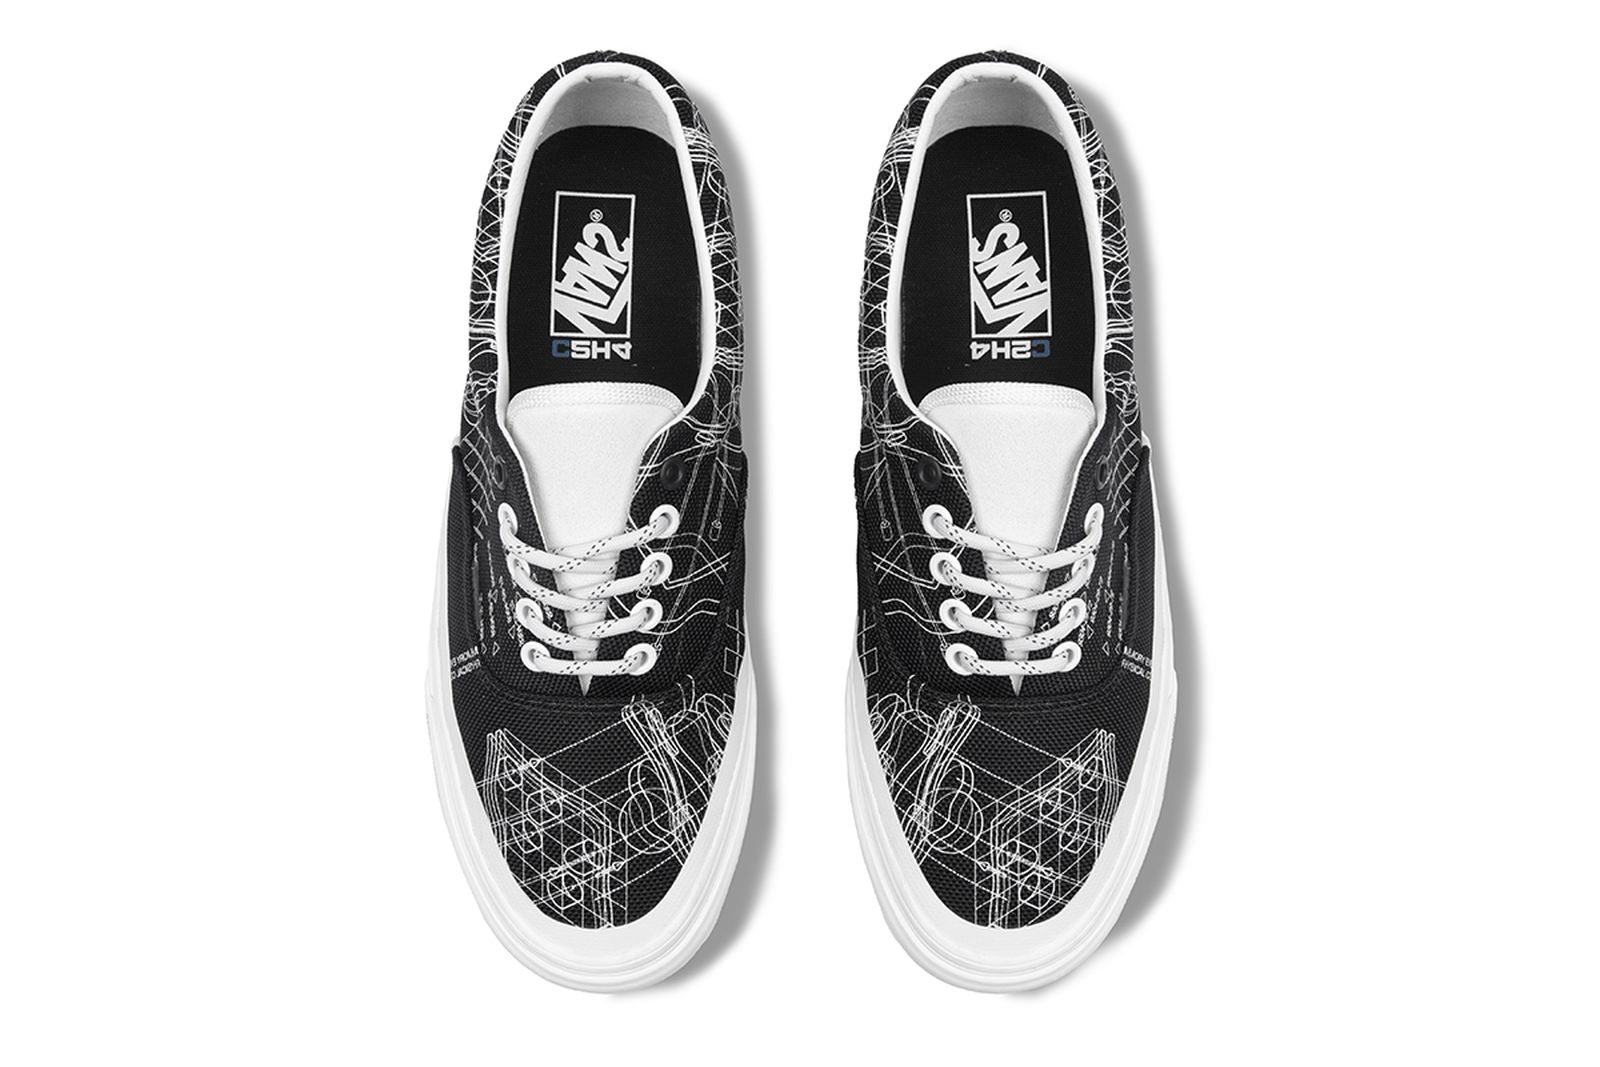 c2h4-vans-the-imagination-of-future-2-release-date-price-1-a-03